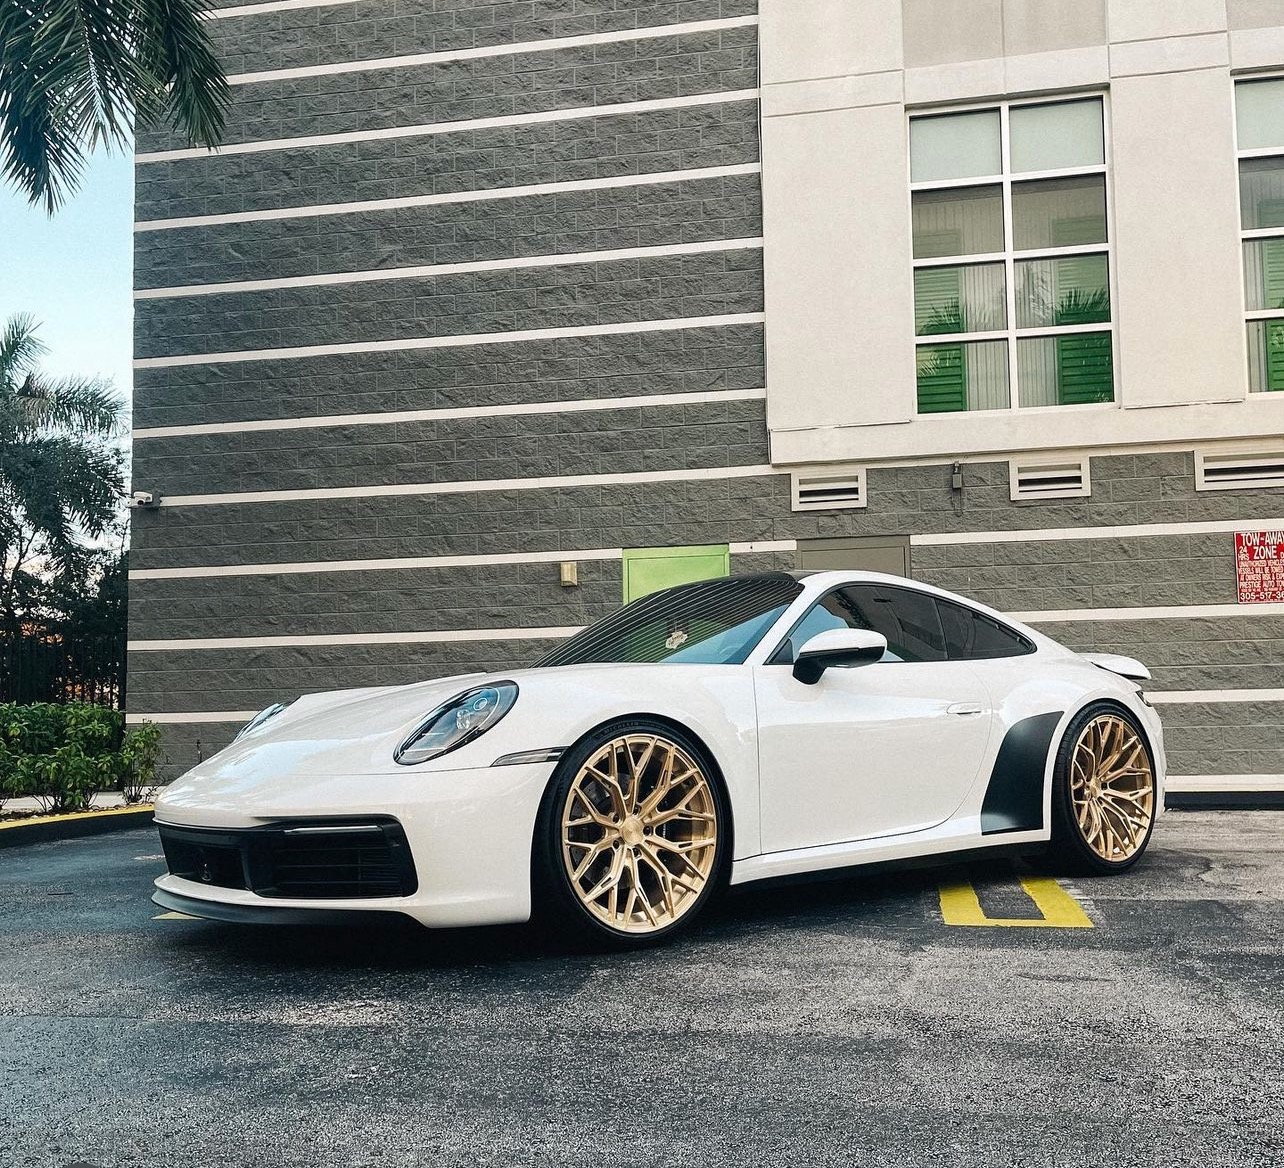 Wheels and Tires/Axles - New Porsche 911 Wheels with Gold Rims - New - 2023 to 2024 Porsche 911 - Tampa, FL 33606, United States